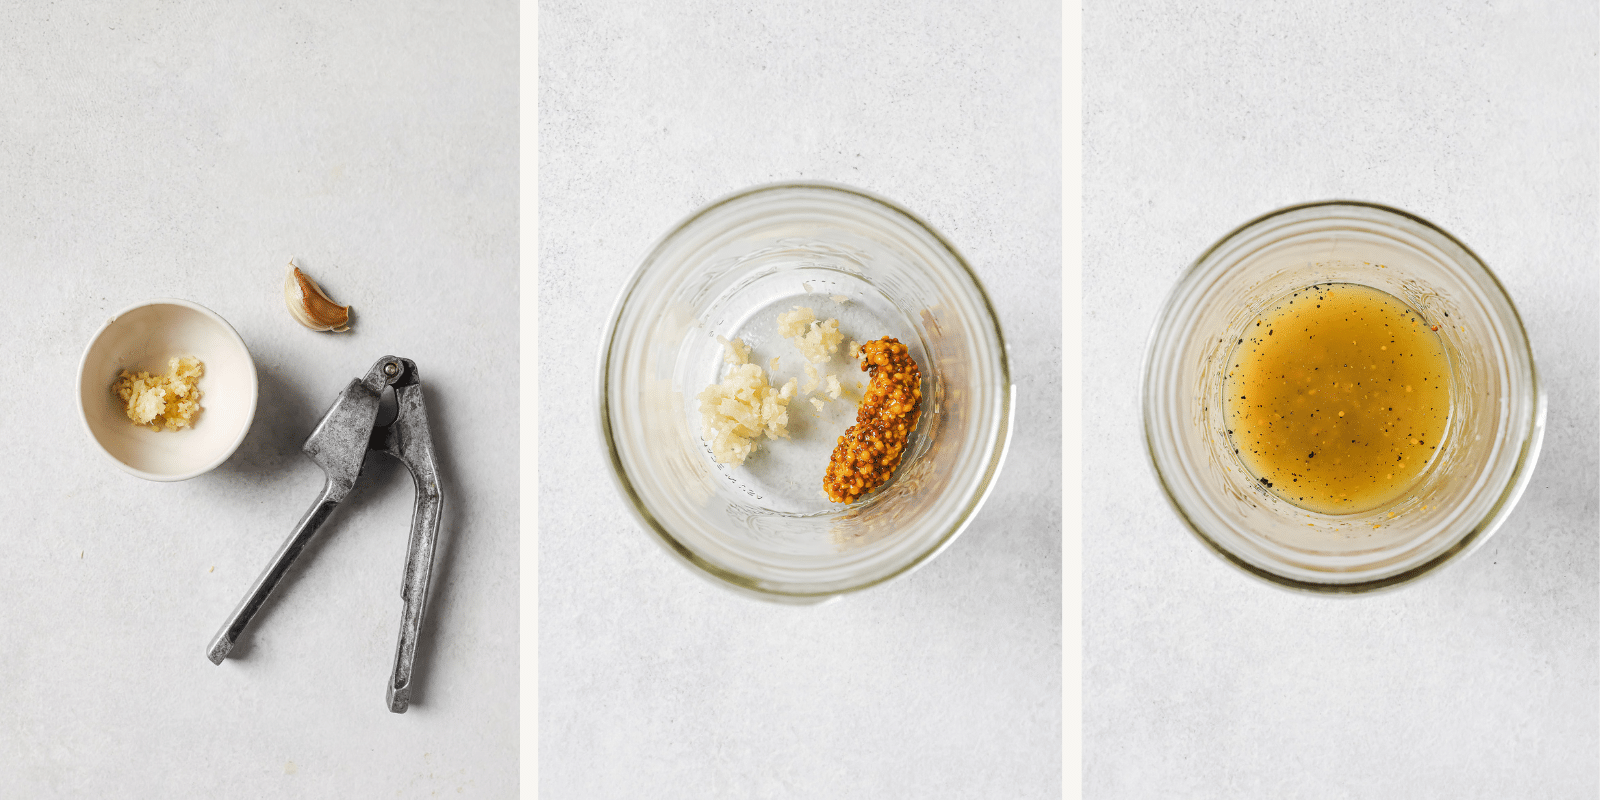 Left: crushed garlic. Center: garlic and mustard in a jar. Right: lemon and seasonings added.